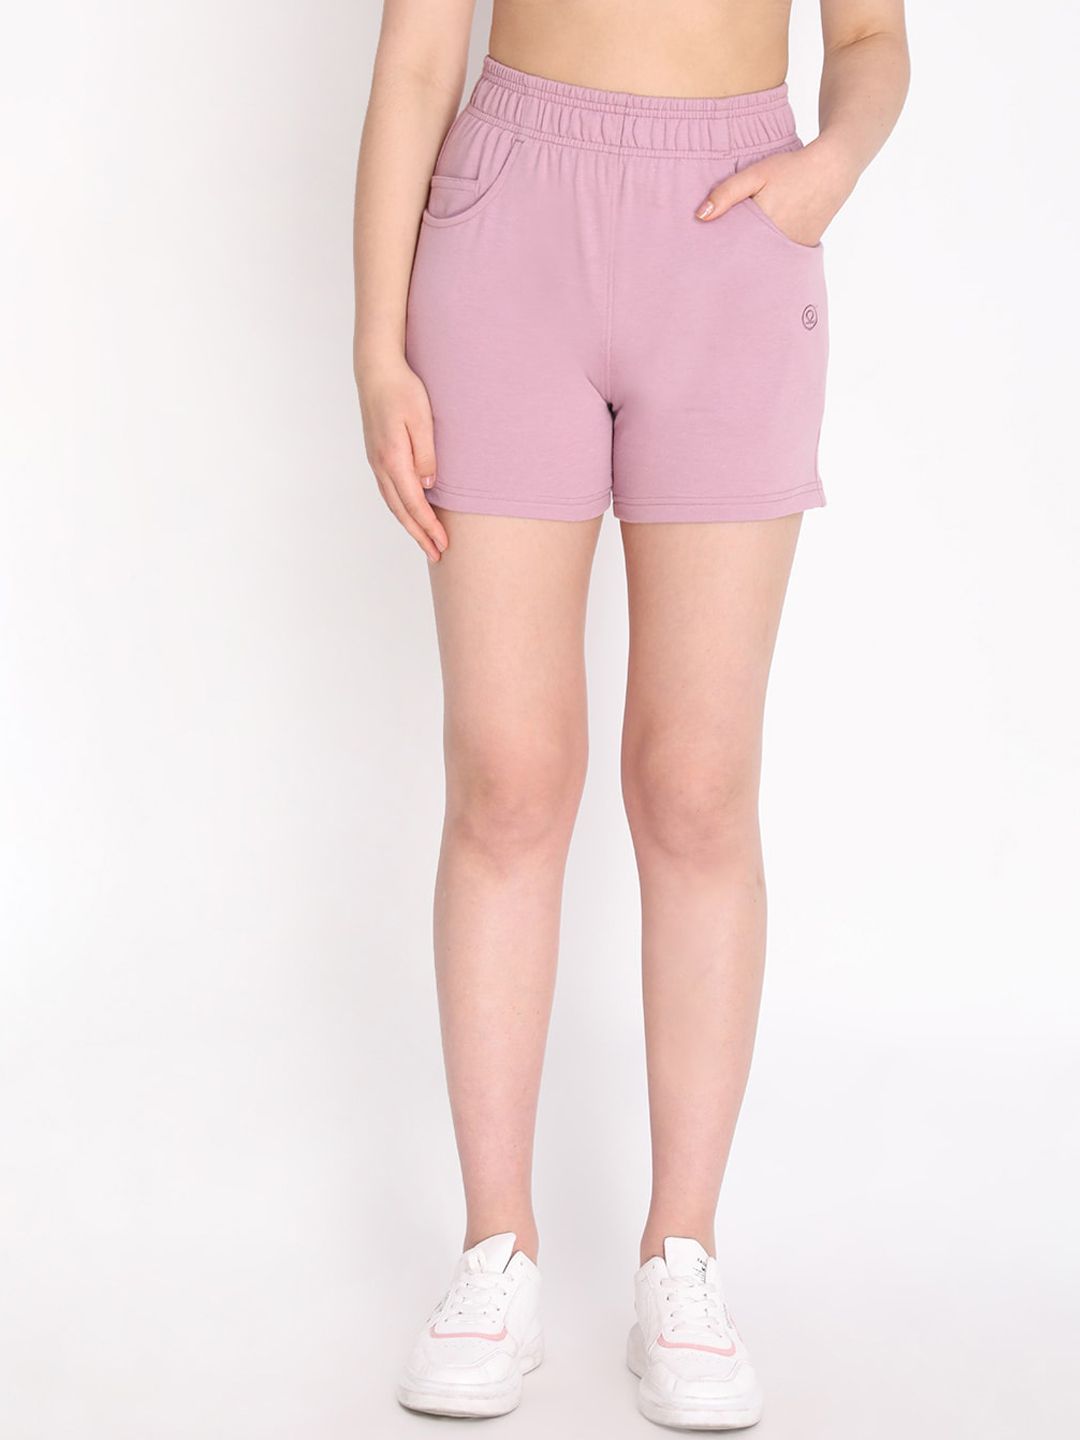 Chkokko Women Pink Slim Fit High-Rise Outdoor Cotton Sports Shorts Price in India